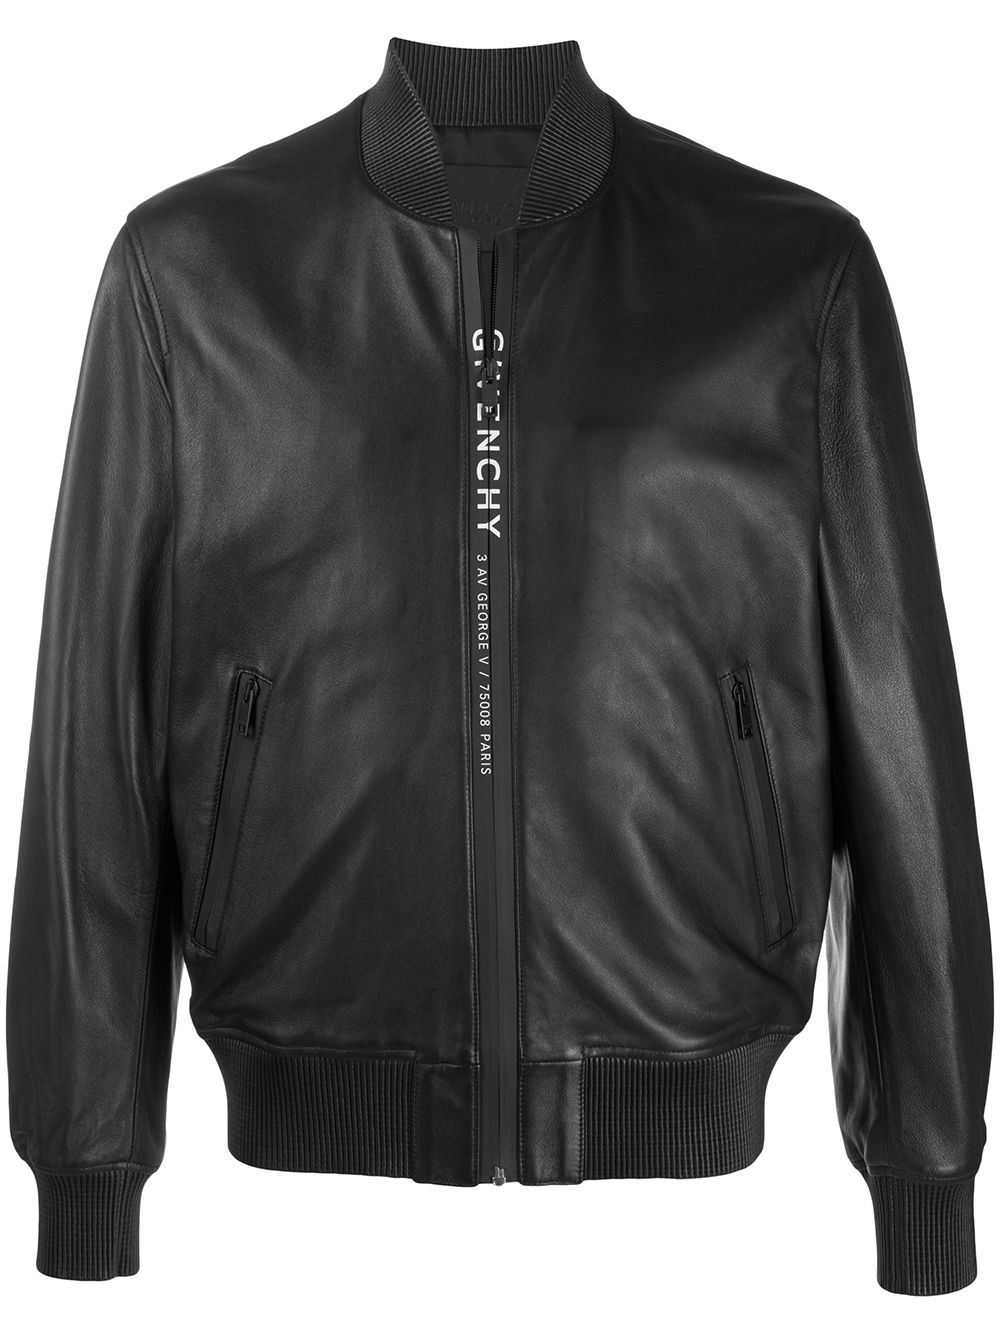 GIVENCHY Man Bomber Jacket In Black Leather With Logoed Zip